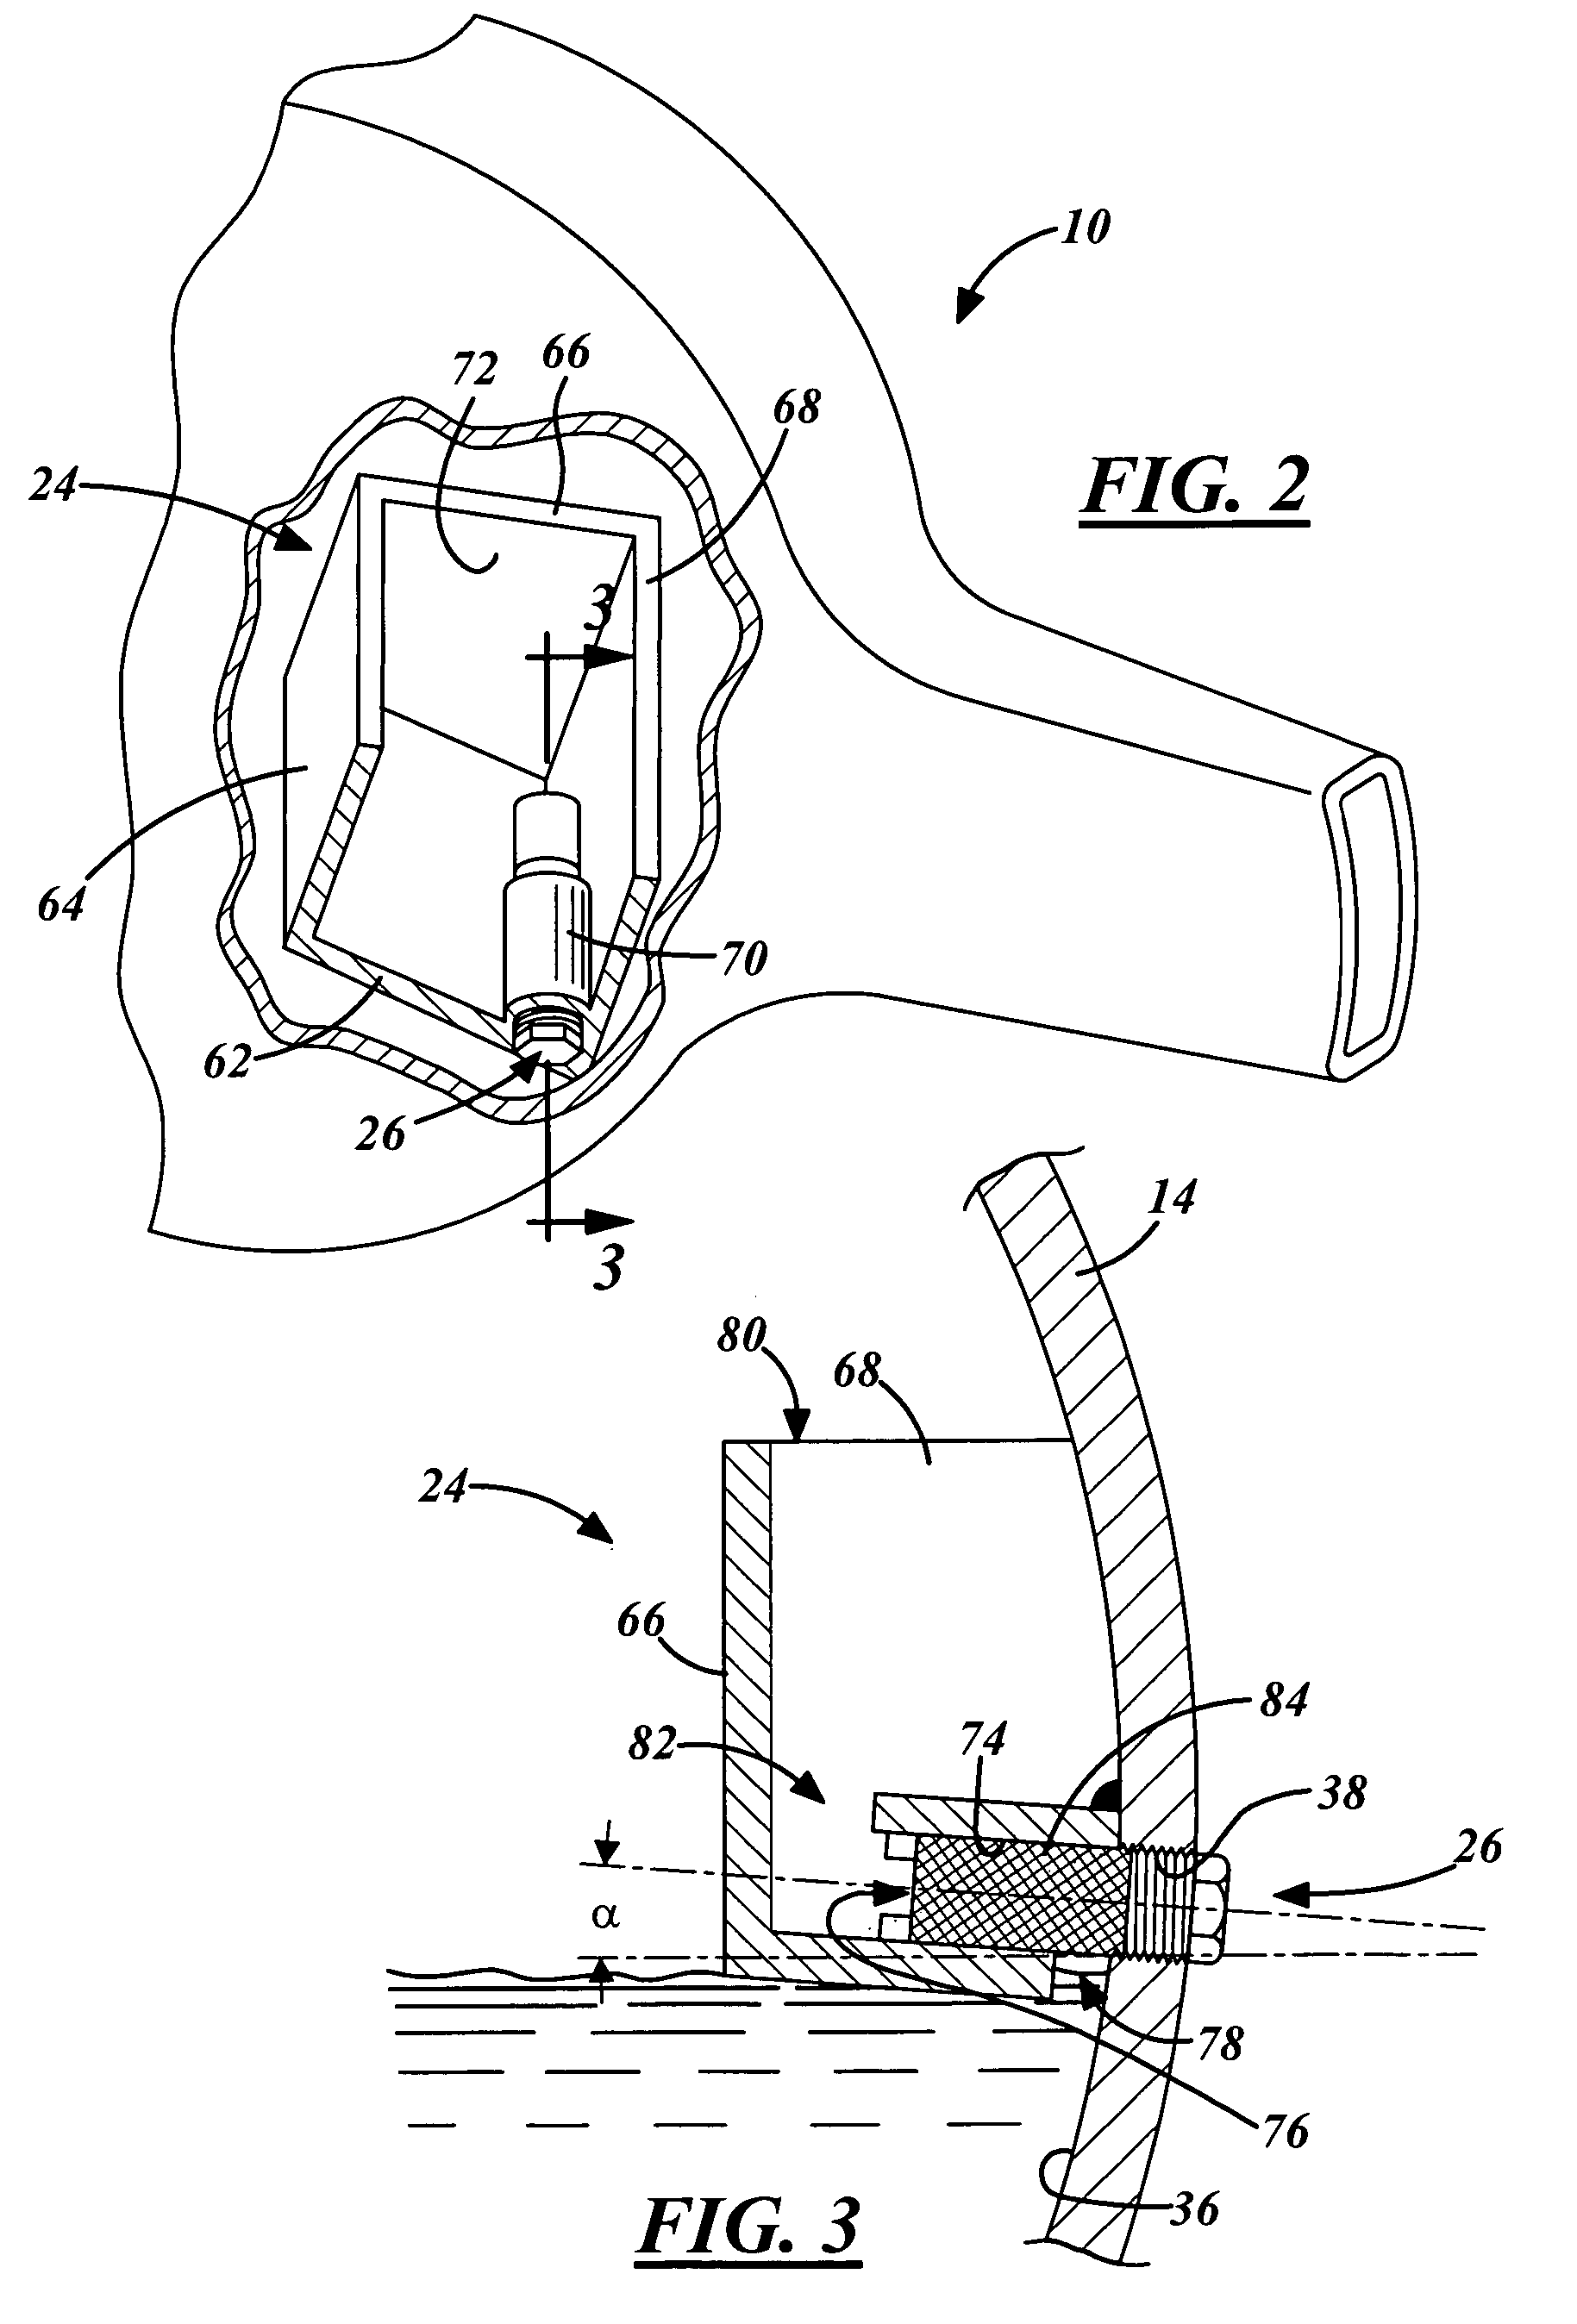 Enhanced lubrication system for drive axle assemblies